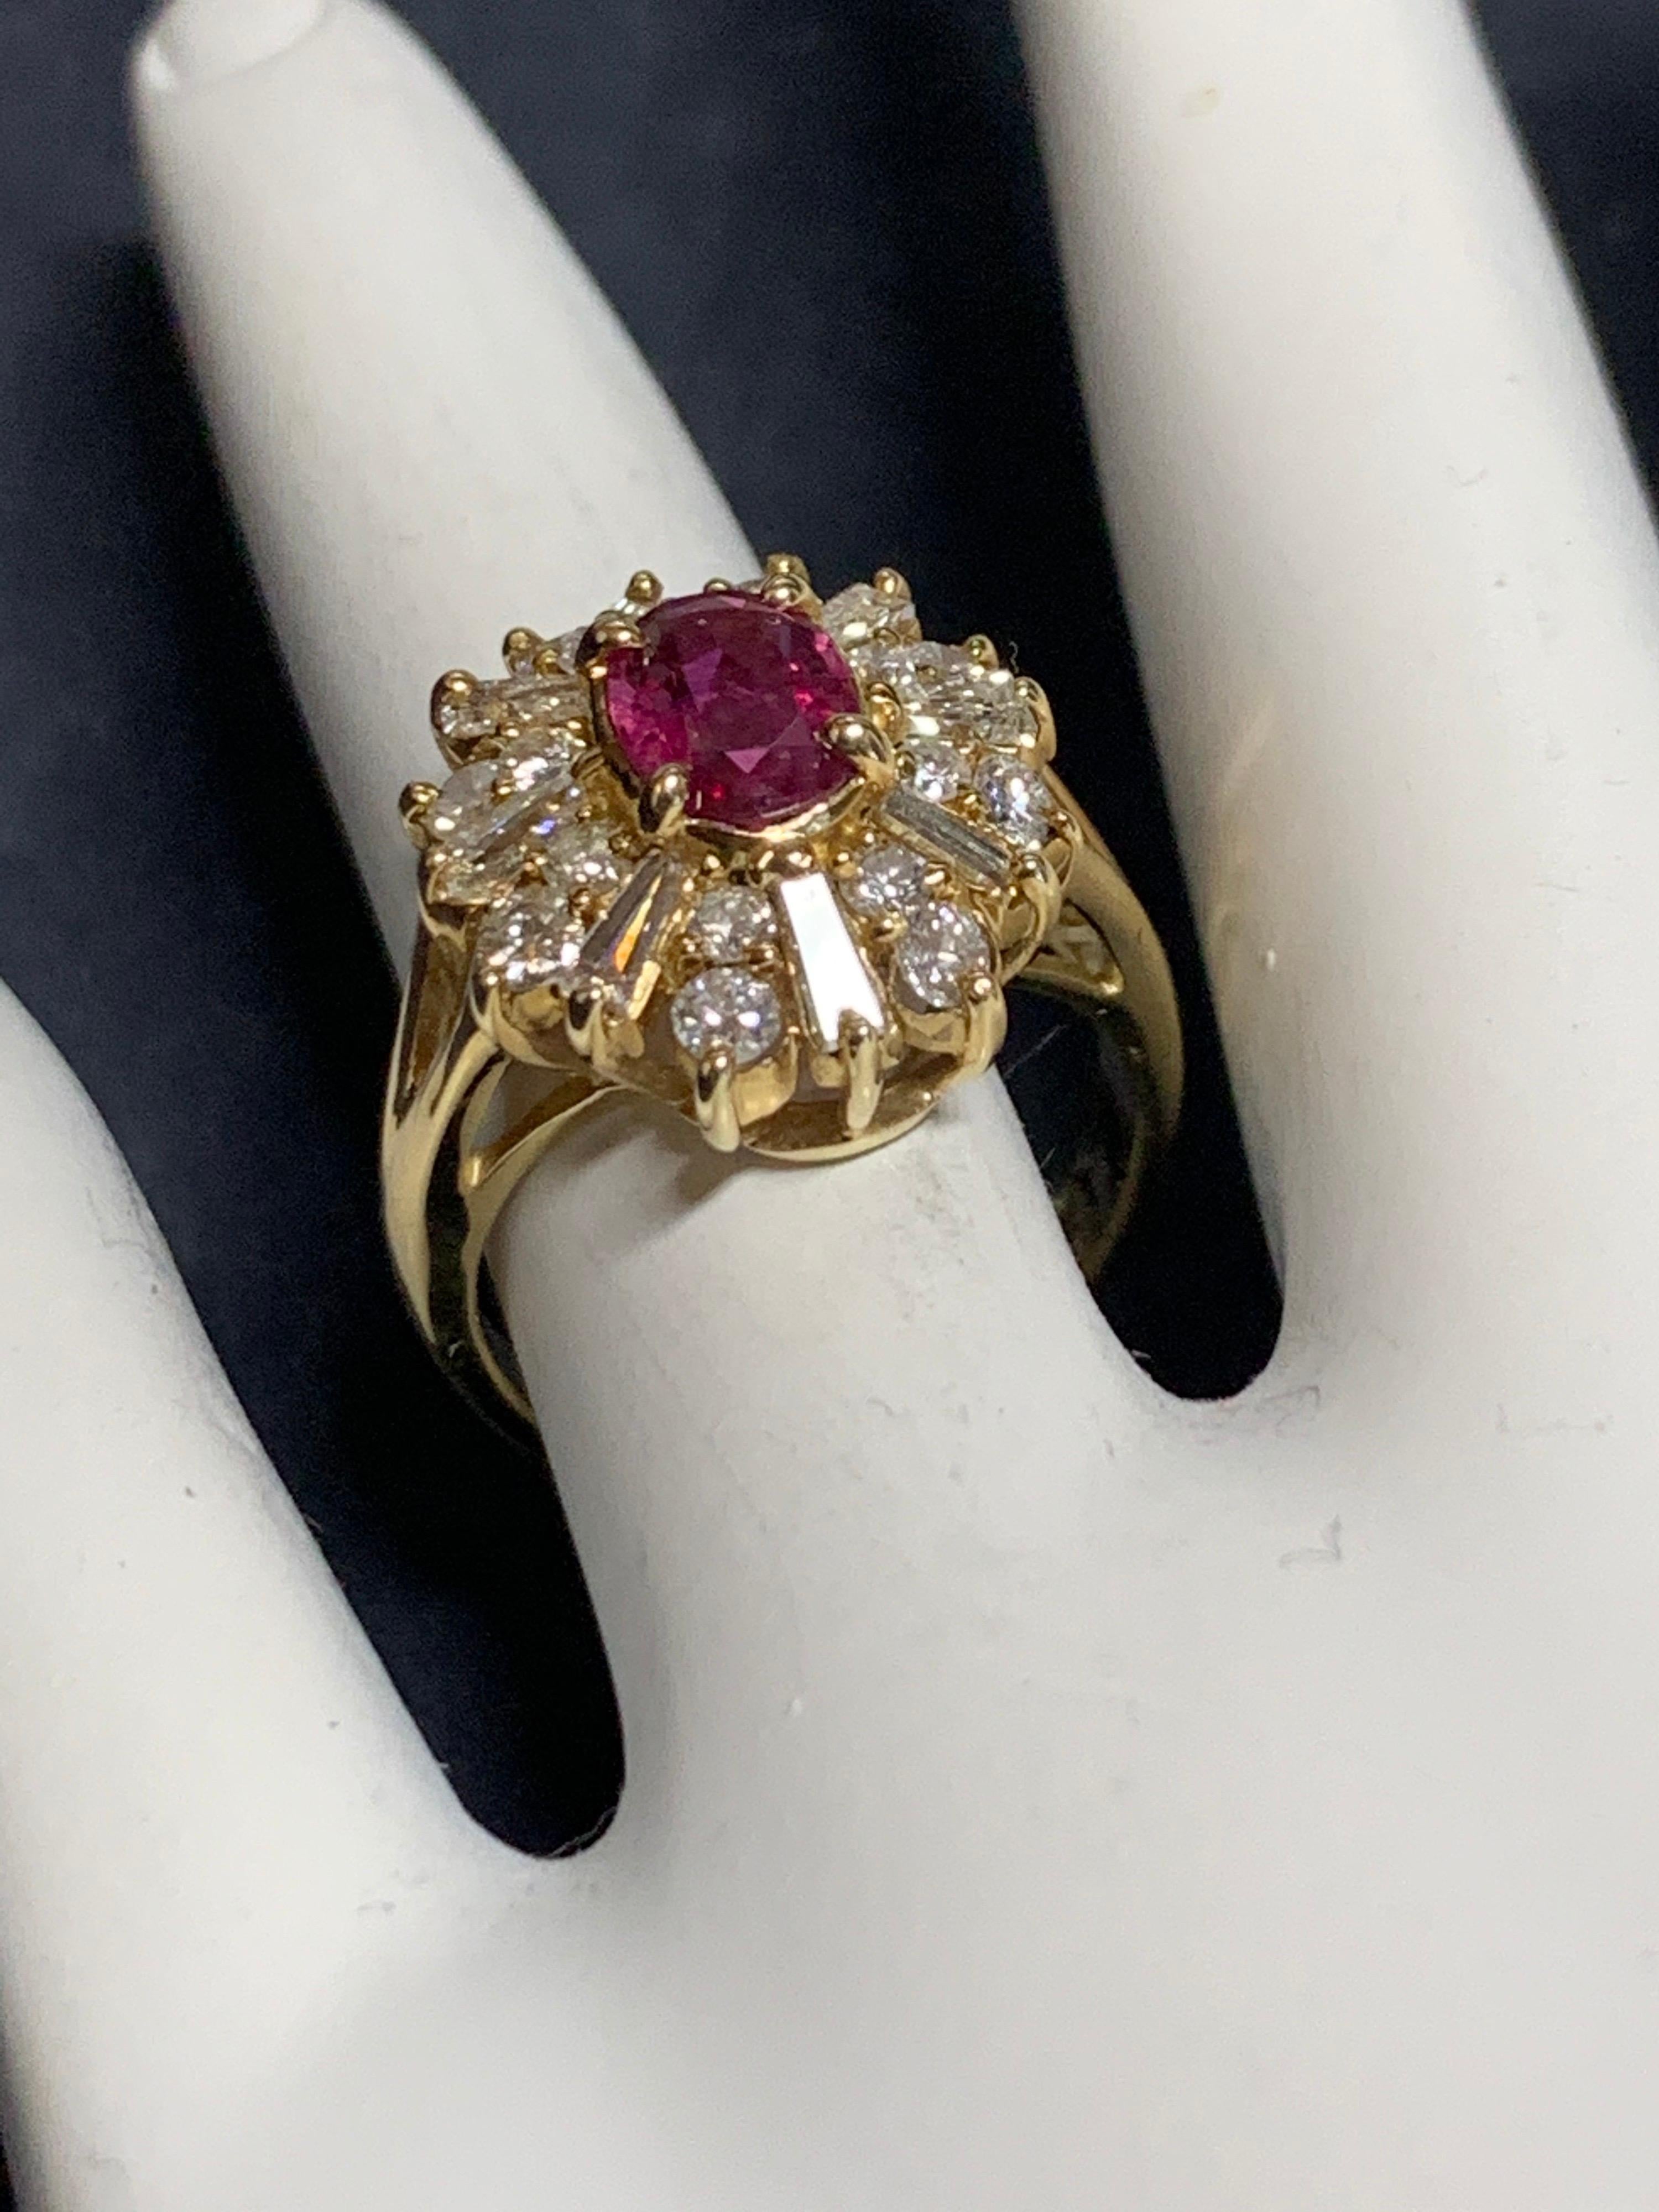 Oval Cut Retro Gold Cocktail Ring 1.85 Carat Natural Oval Gem Ruby and Diamond circa 1960 For Sale